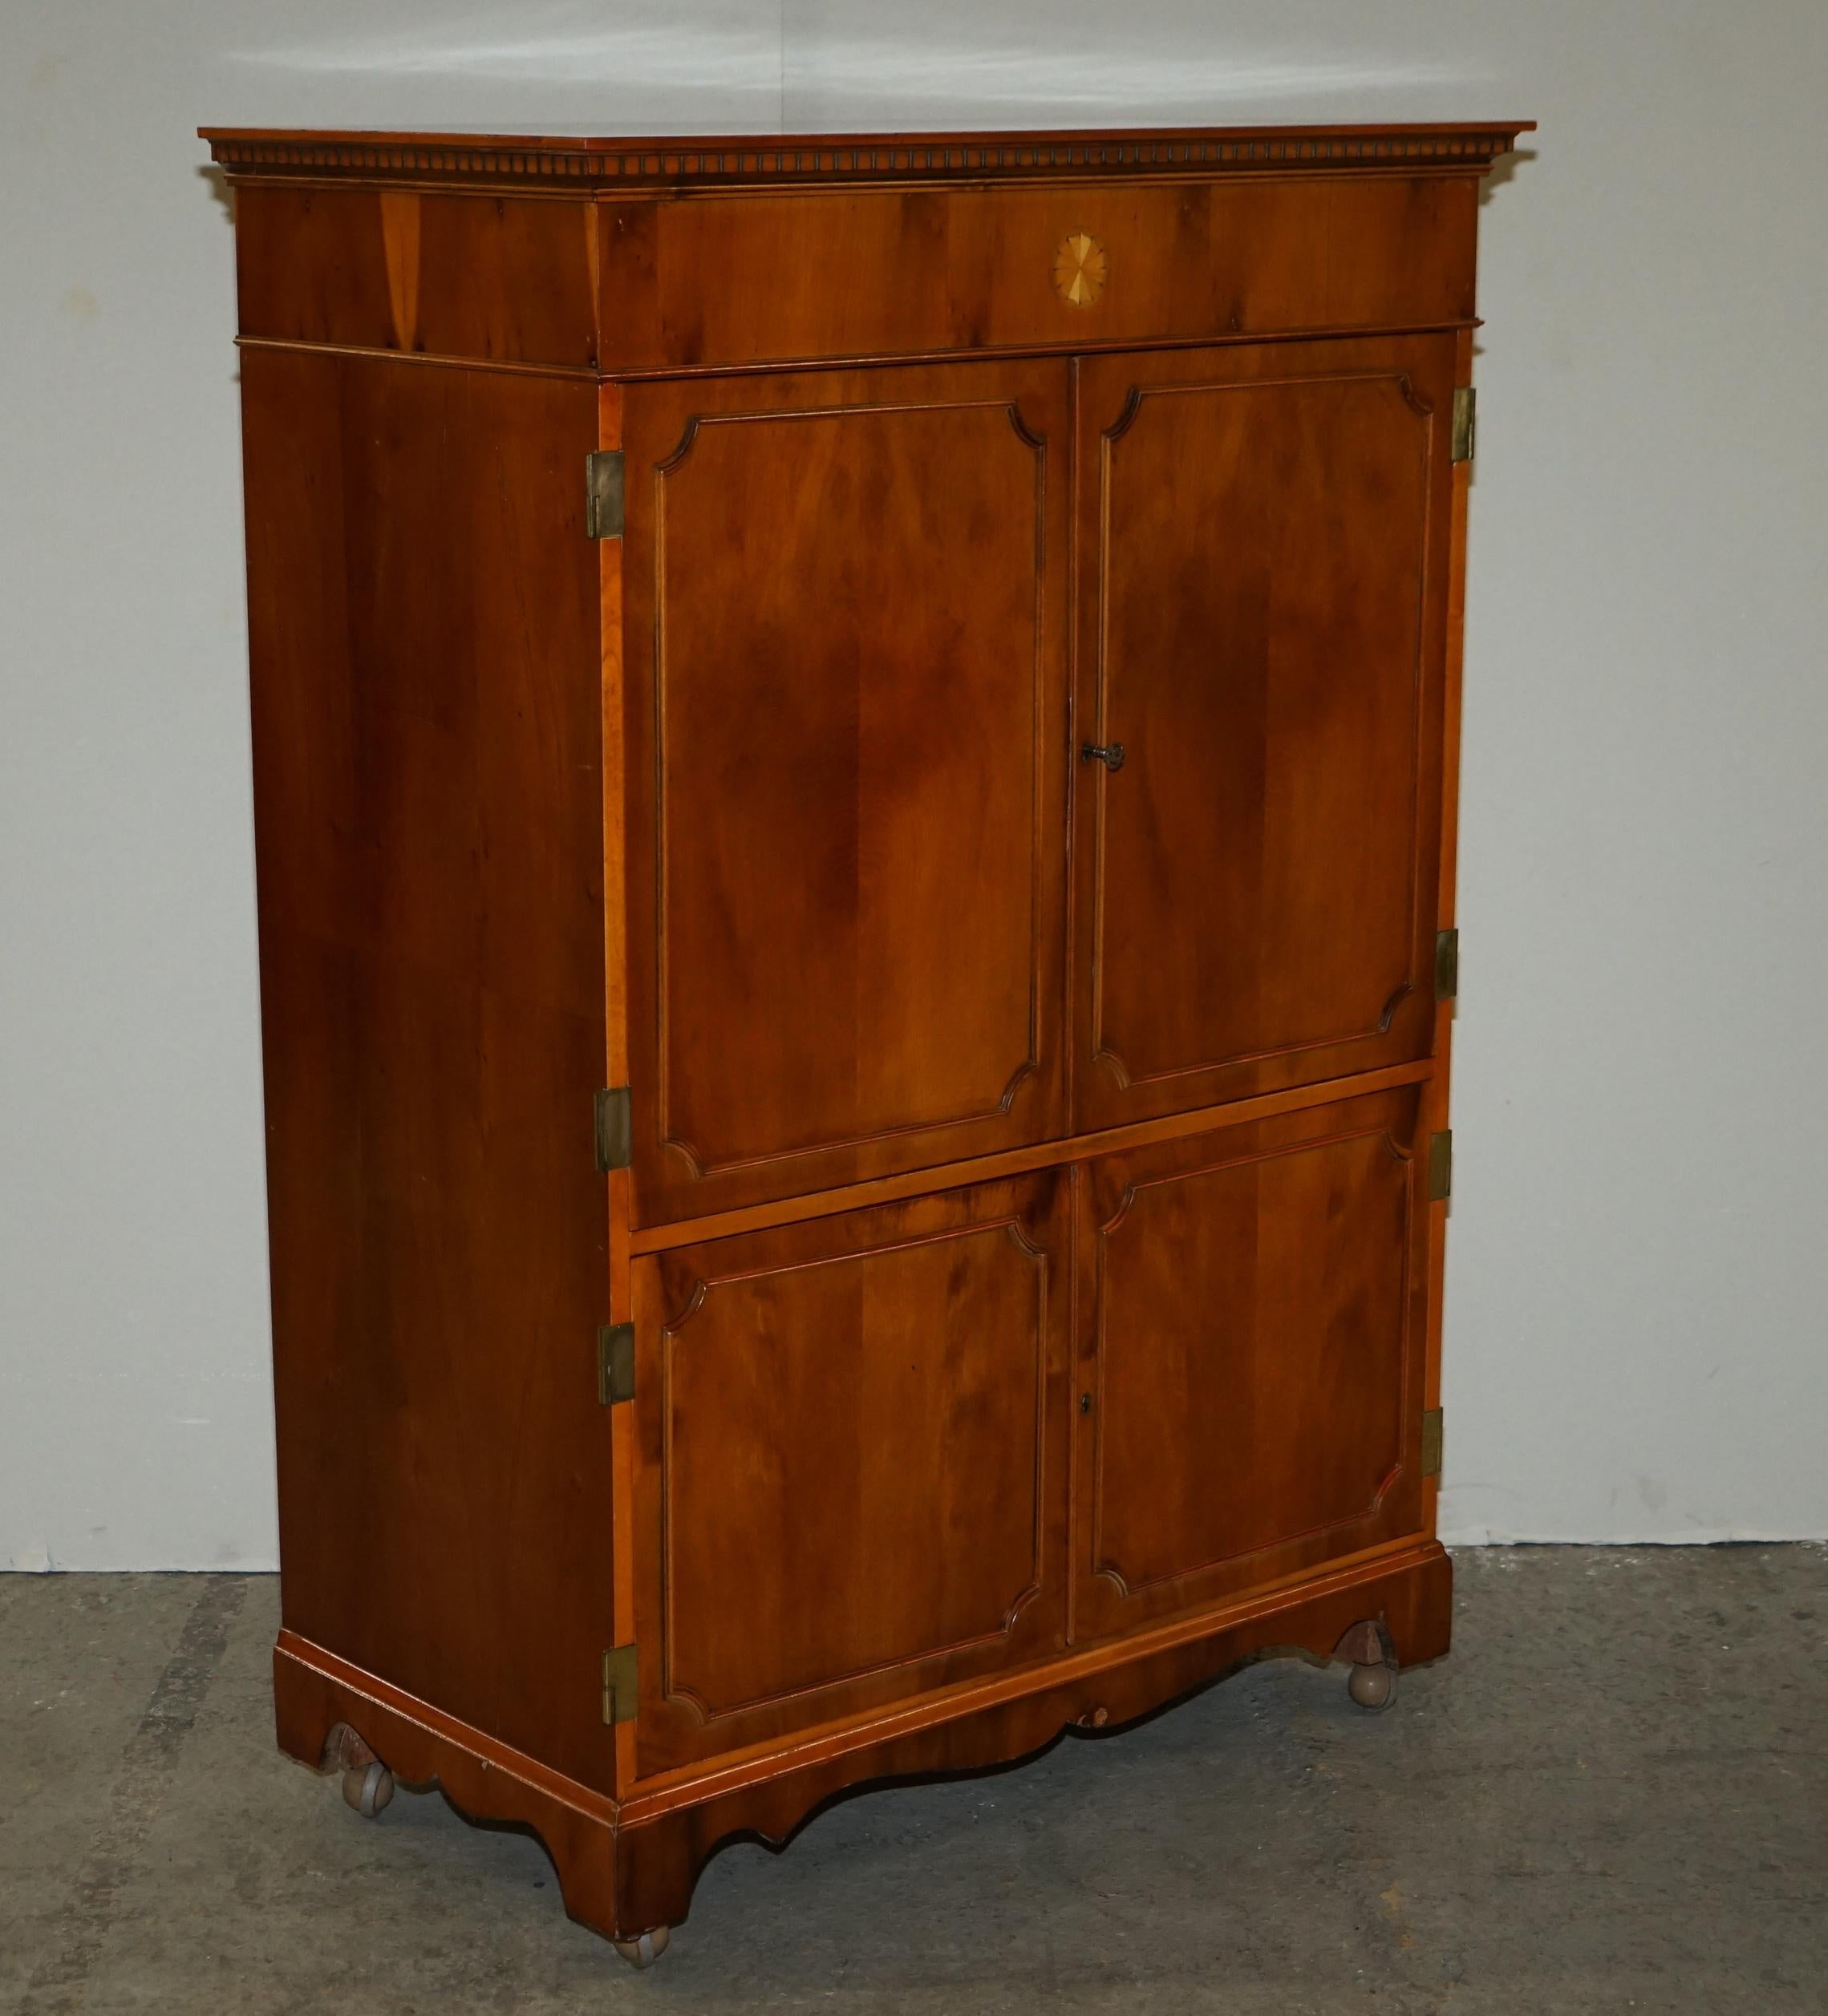 Here we have for sale this Mid-Century Modern Abbey Craft yew wood tv media cabinet with hinged top and Sheraton detailing.

Overall, the cabinet is in good condition with a few signs of wear, it looks like the back section has been removed and